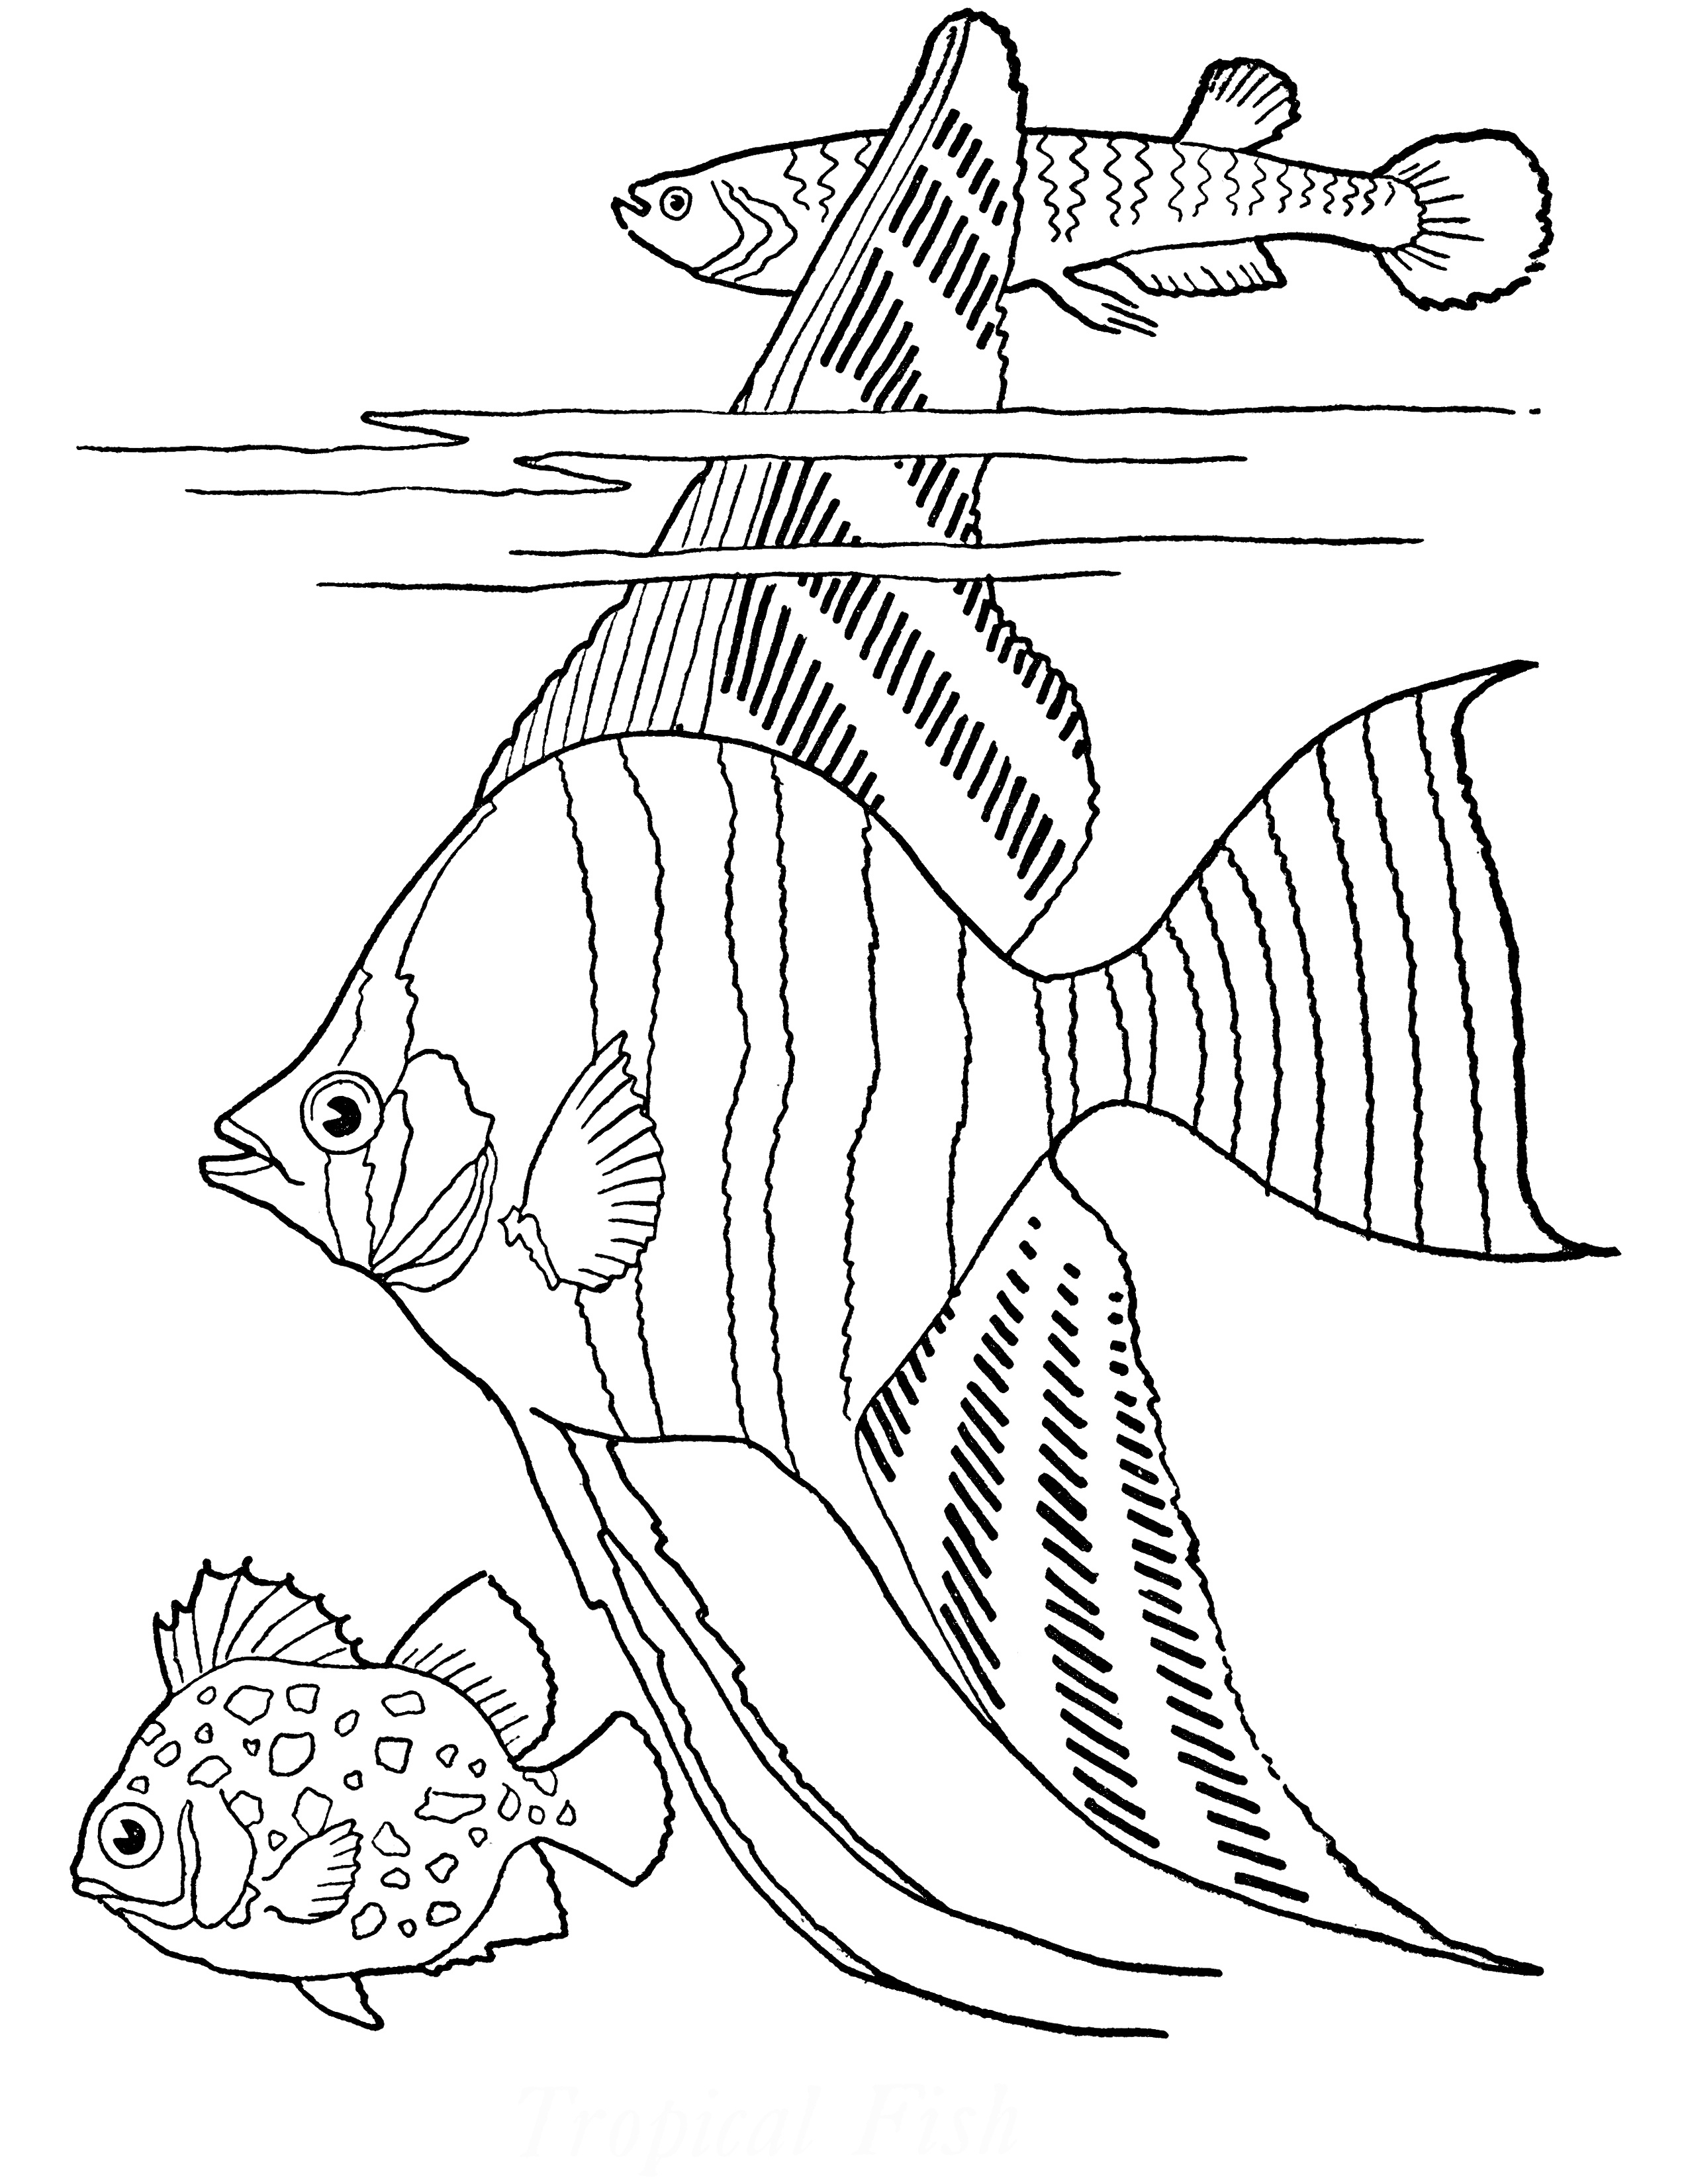 Free Printable Adult Coloring Page - Tropical Fish! - The Graphics Fairy - Free Printable Fish Coloring Pages